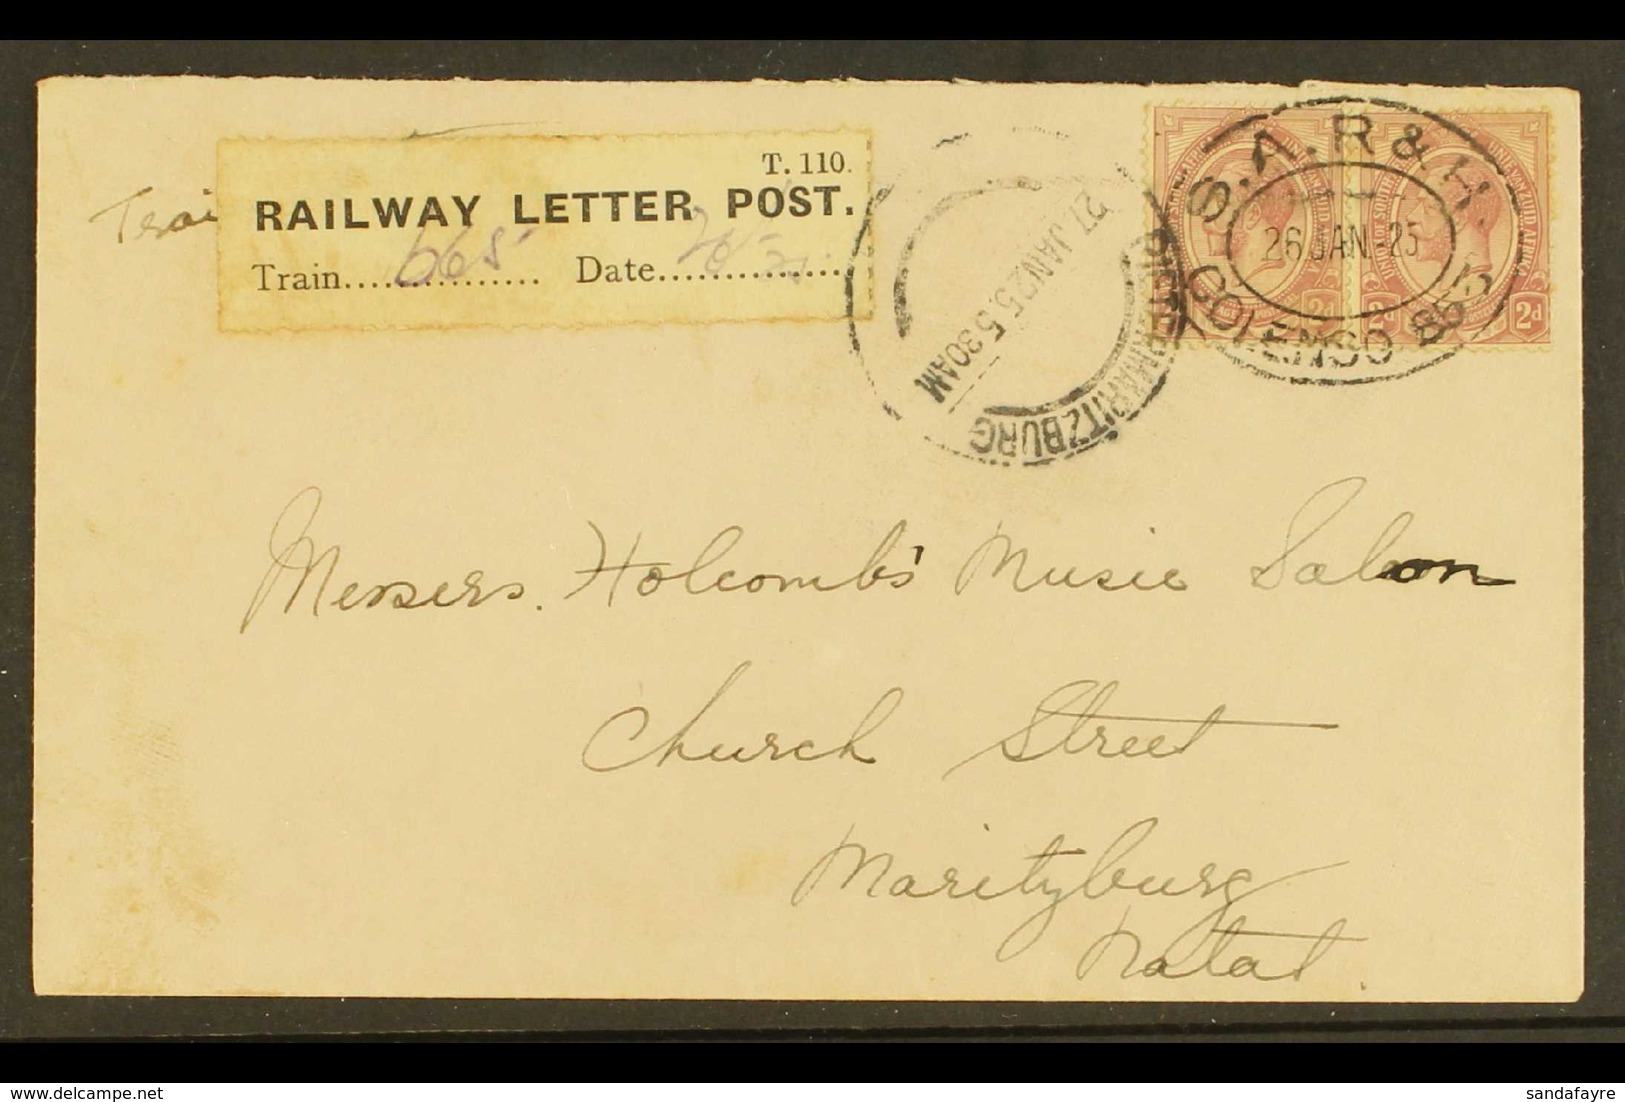 1925 RAILWAY LETTER POST COVER 2d KGV Pair On Cover, Cancelled With Oval "S.A.R. & H. COLENSO 853" 26.1.25 Postmark, "T. - Unclassified